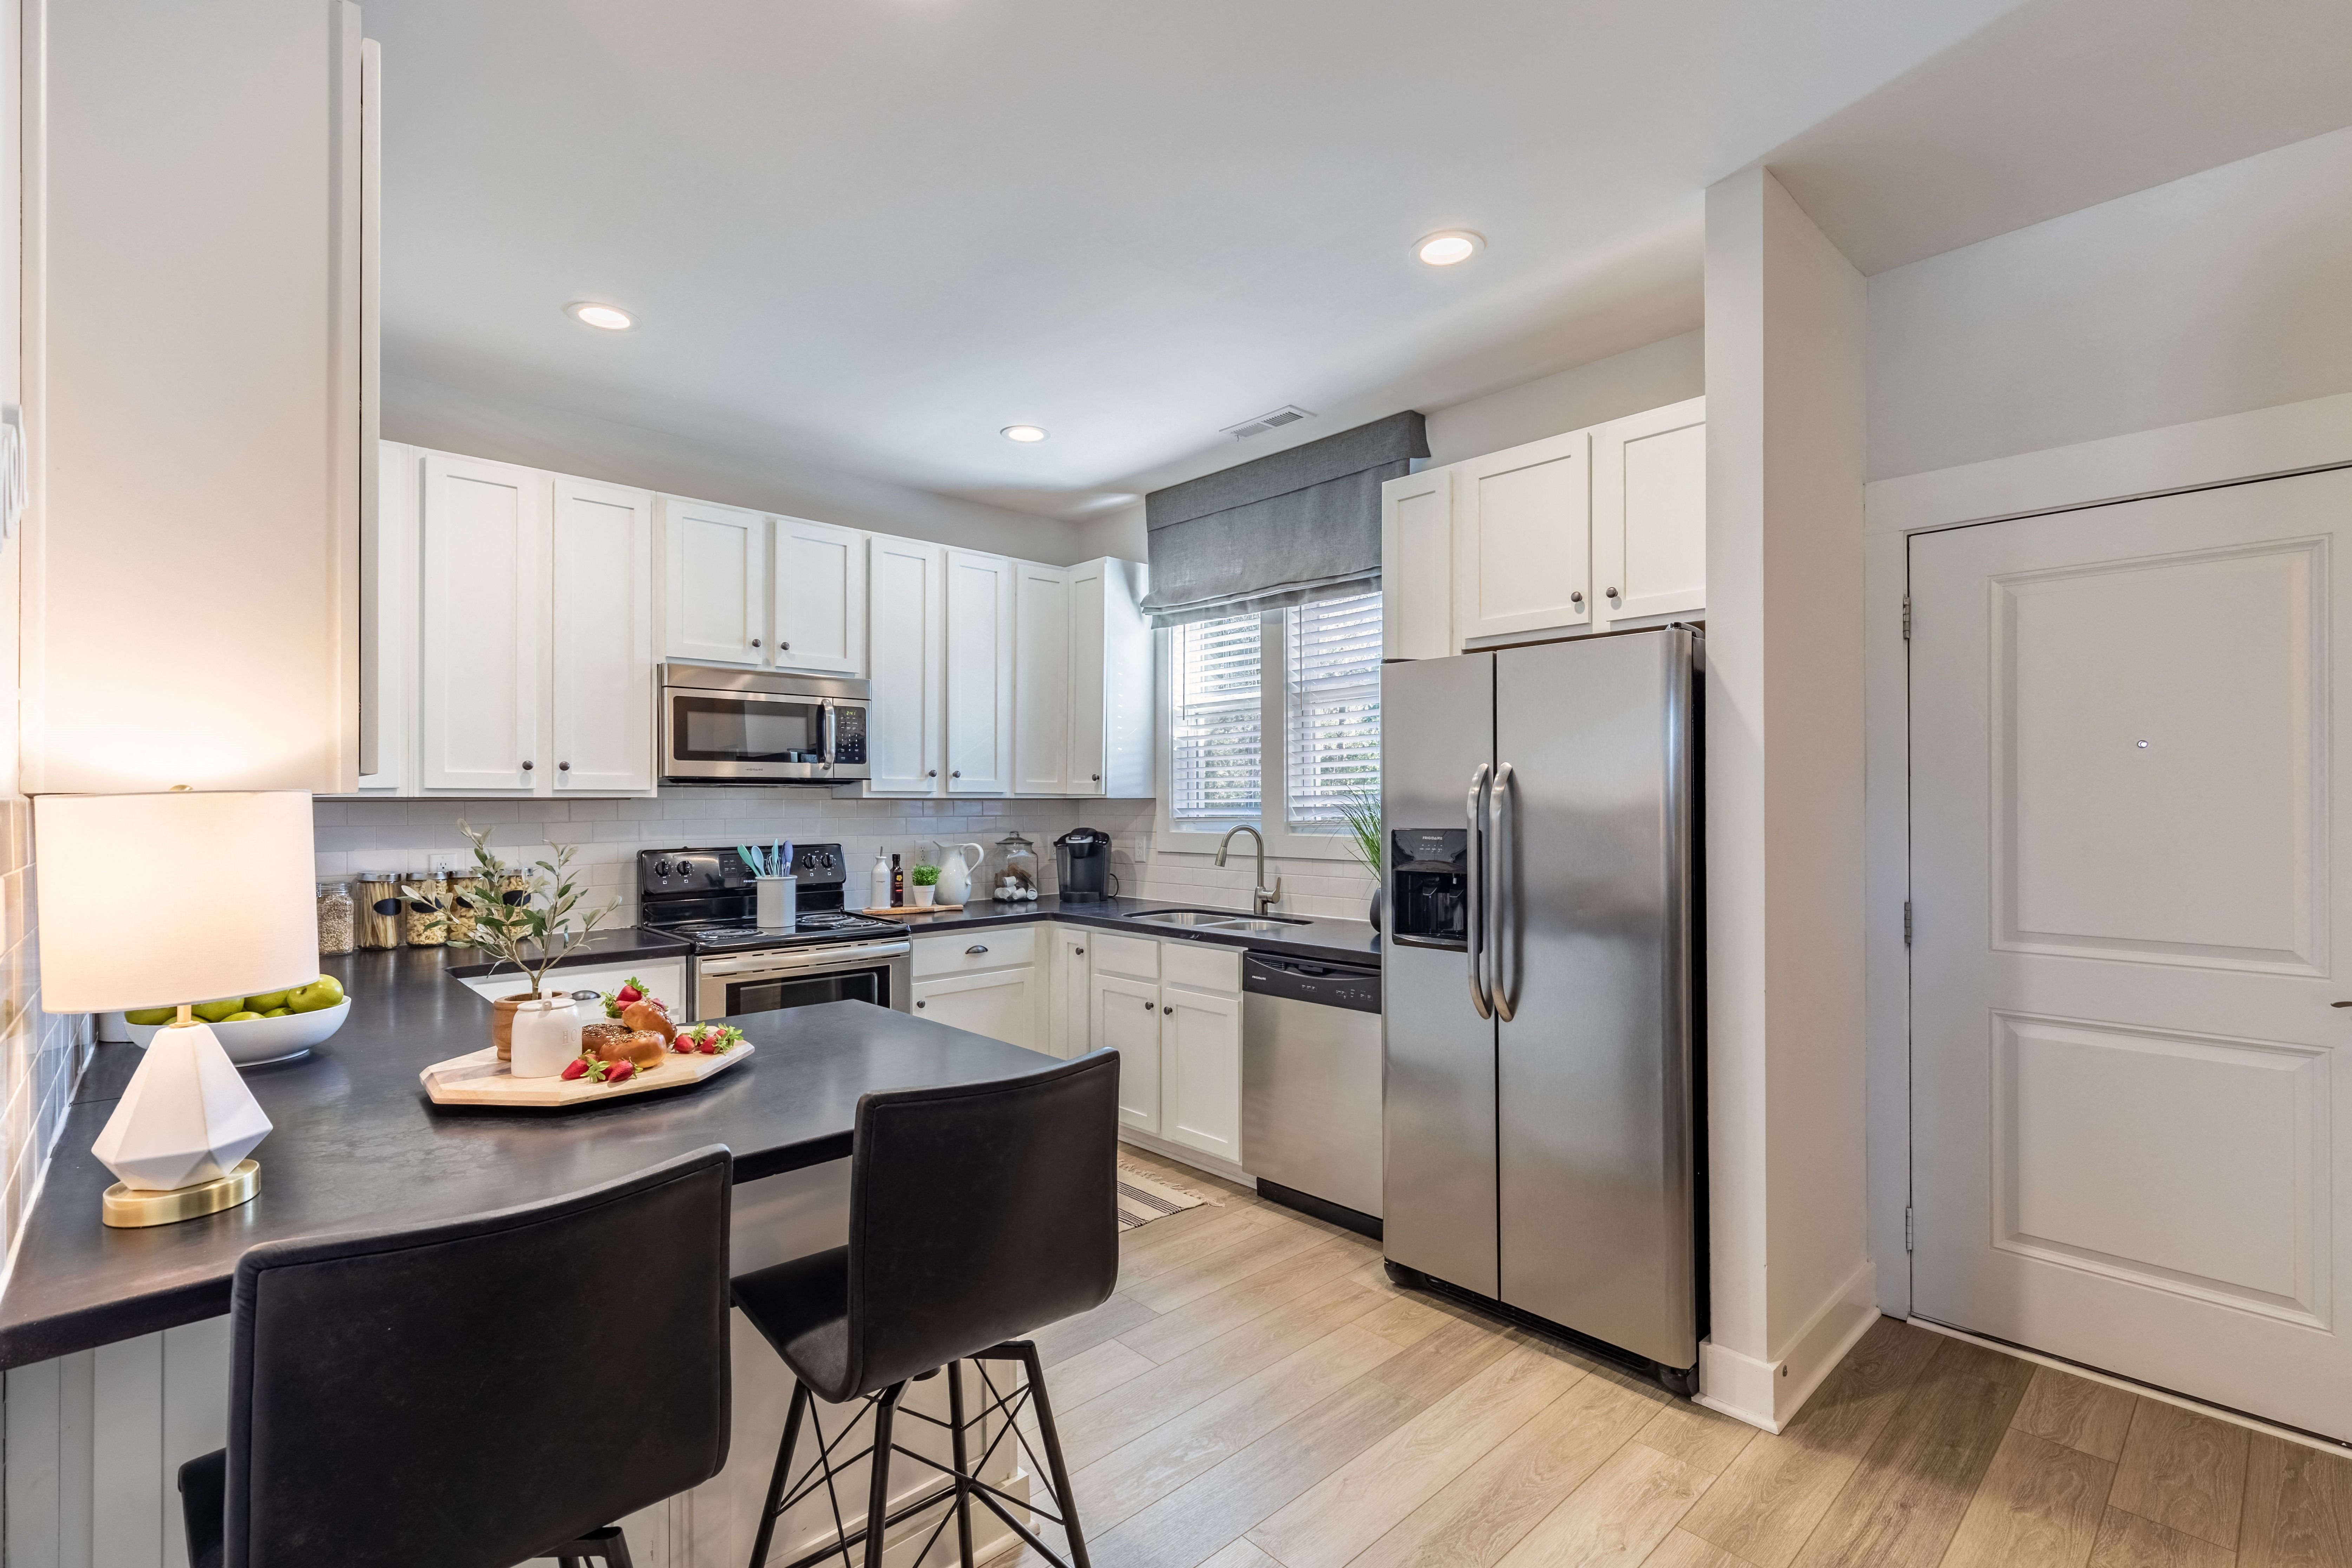 Townhouses in Wilmington NC - Myrtle Landing - Kitchen with White Cabinets, a Breakfast Bar, Wood-Style Flooring, and Stainless-Steel Appliances